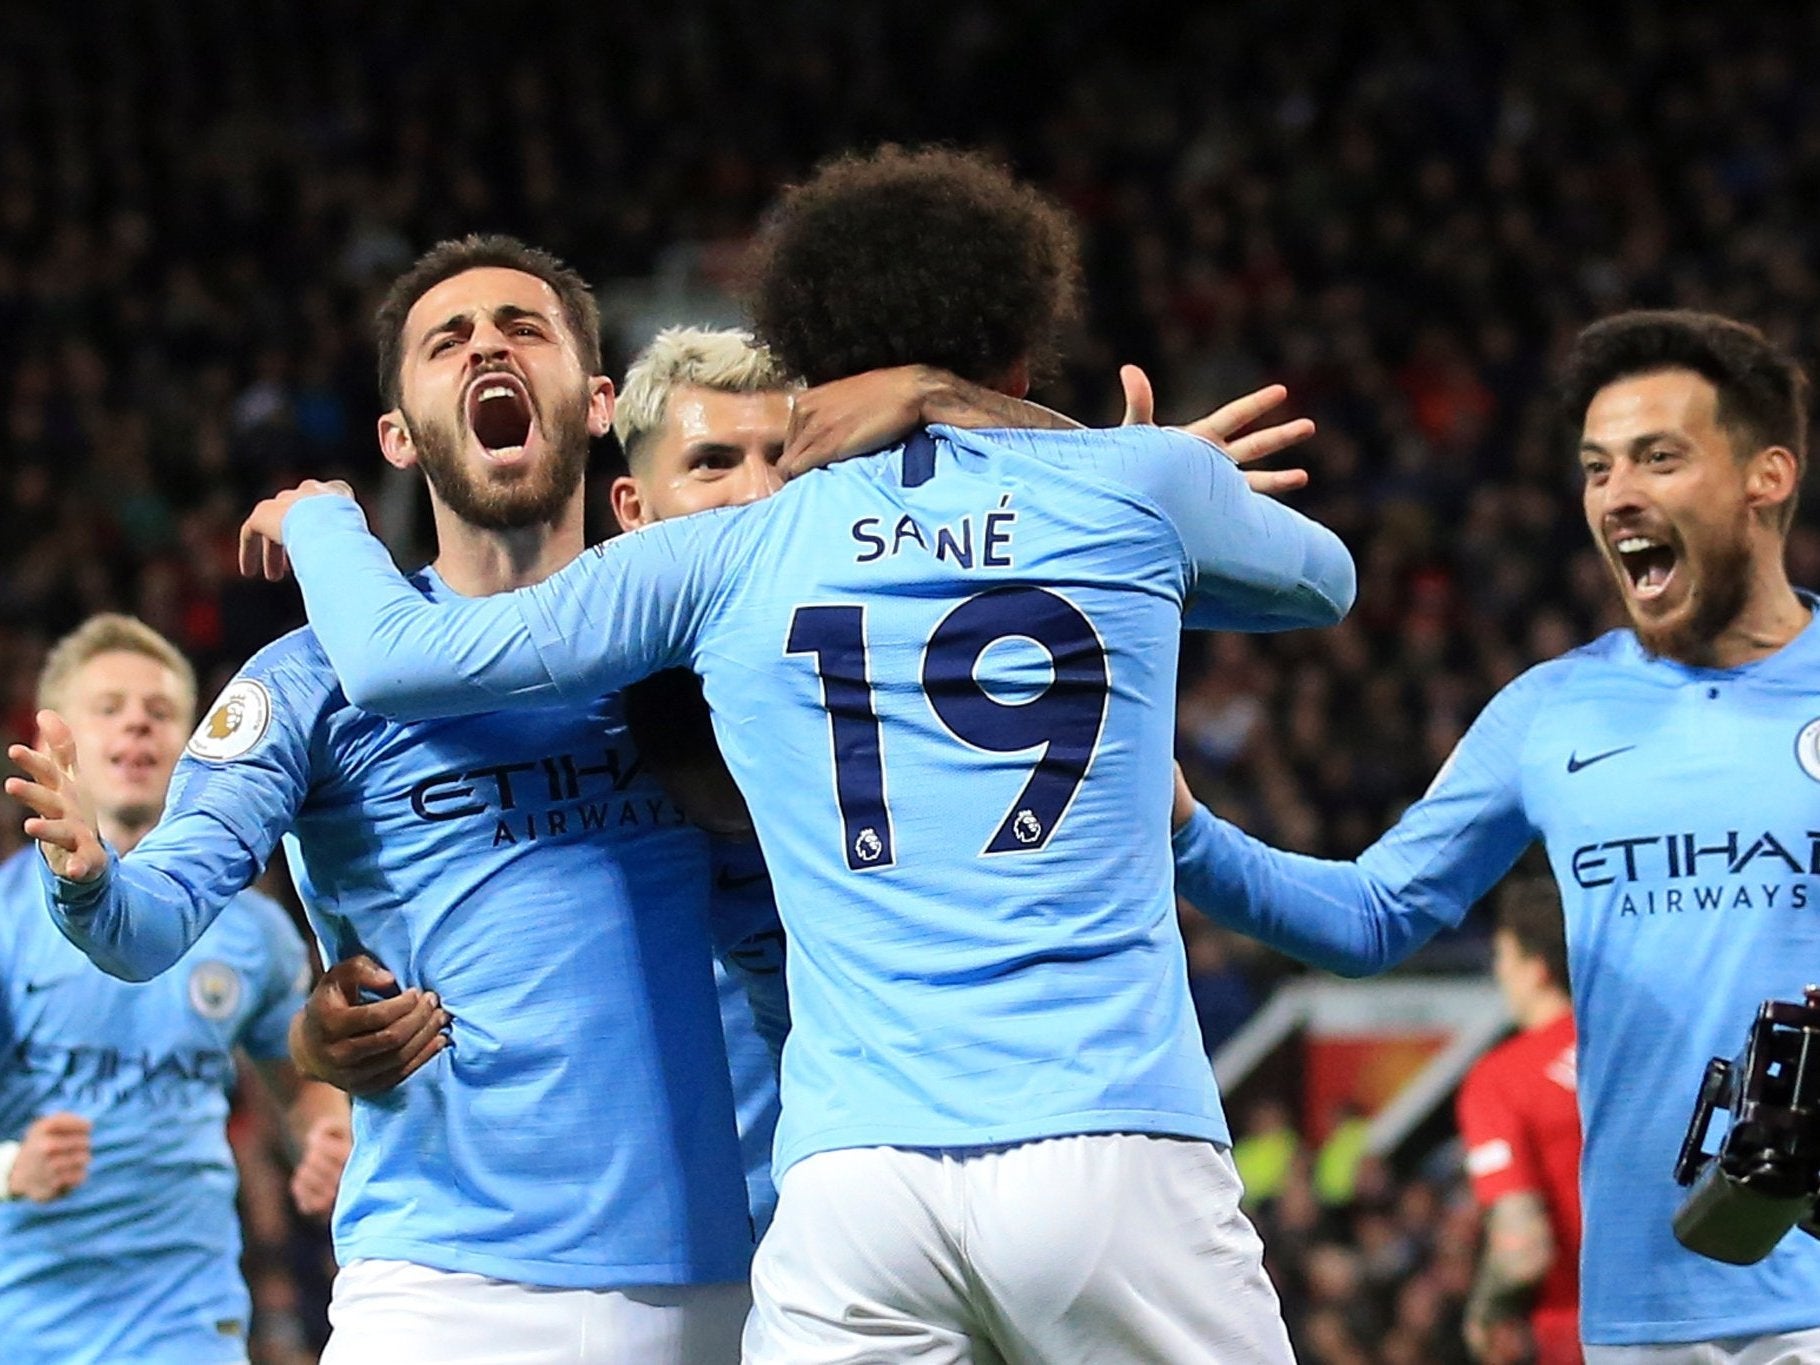 Manchester United vs Manchester City result: Pep Guardiola's side take decisive step towards title